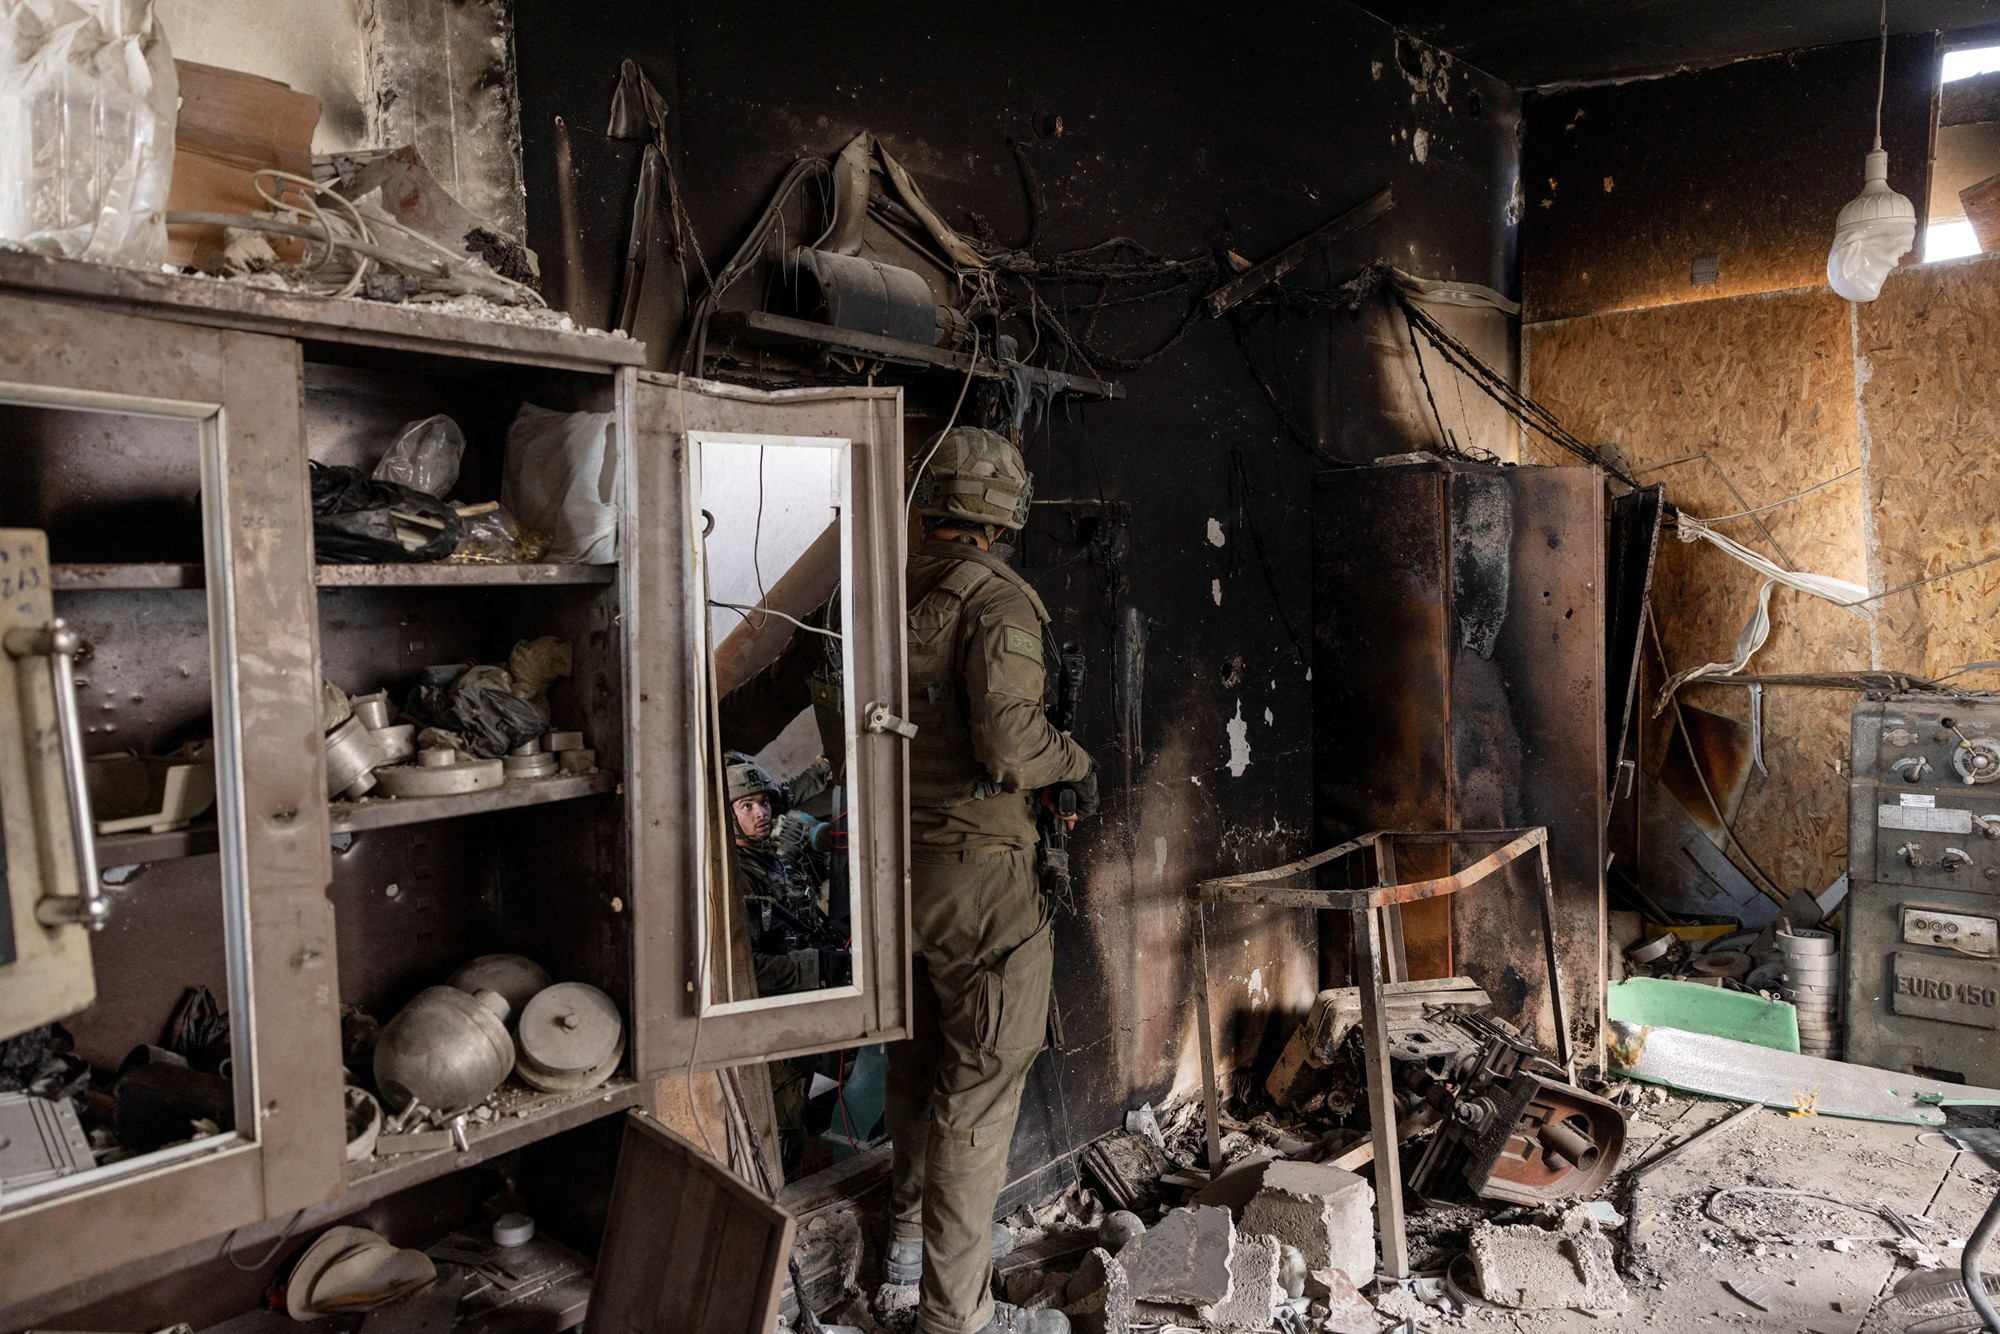 A soldier is pictured in what looks like a heavily damaged workshop